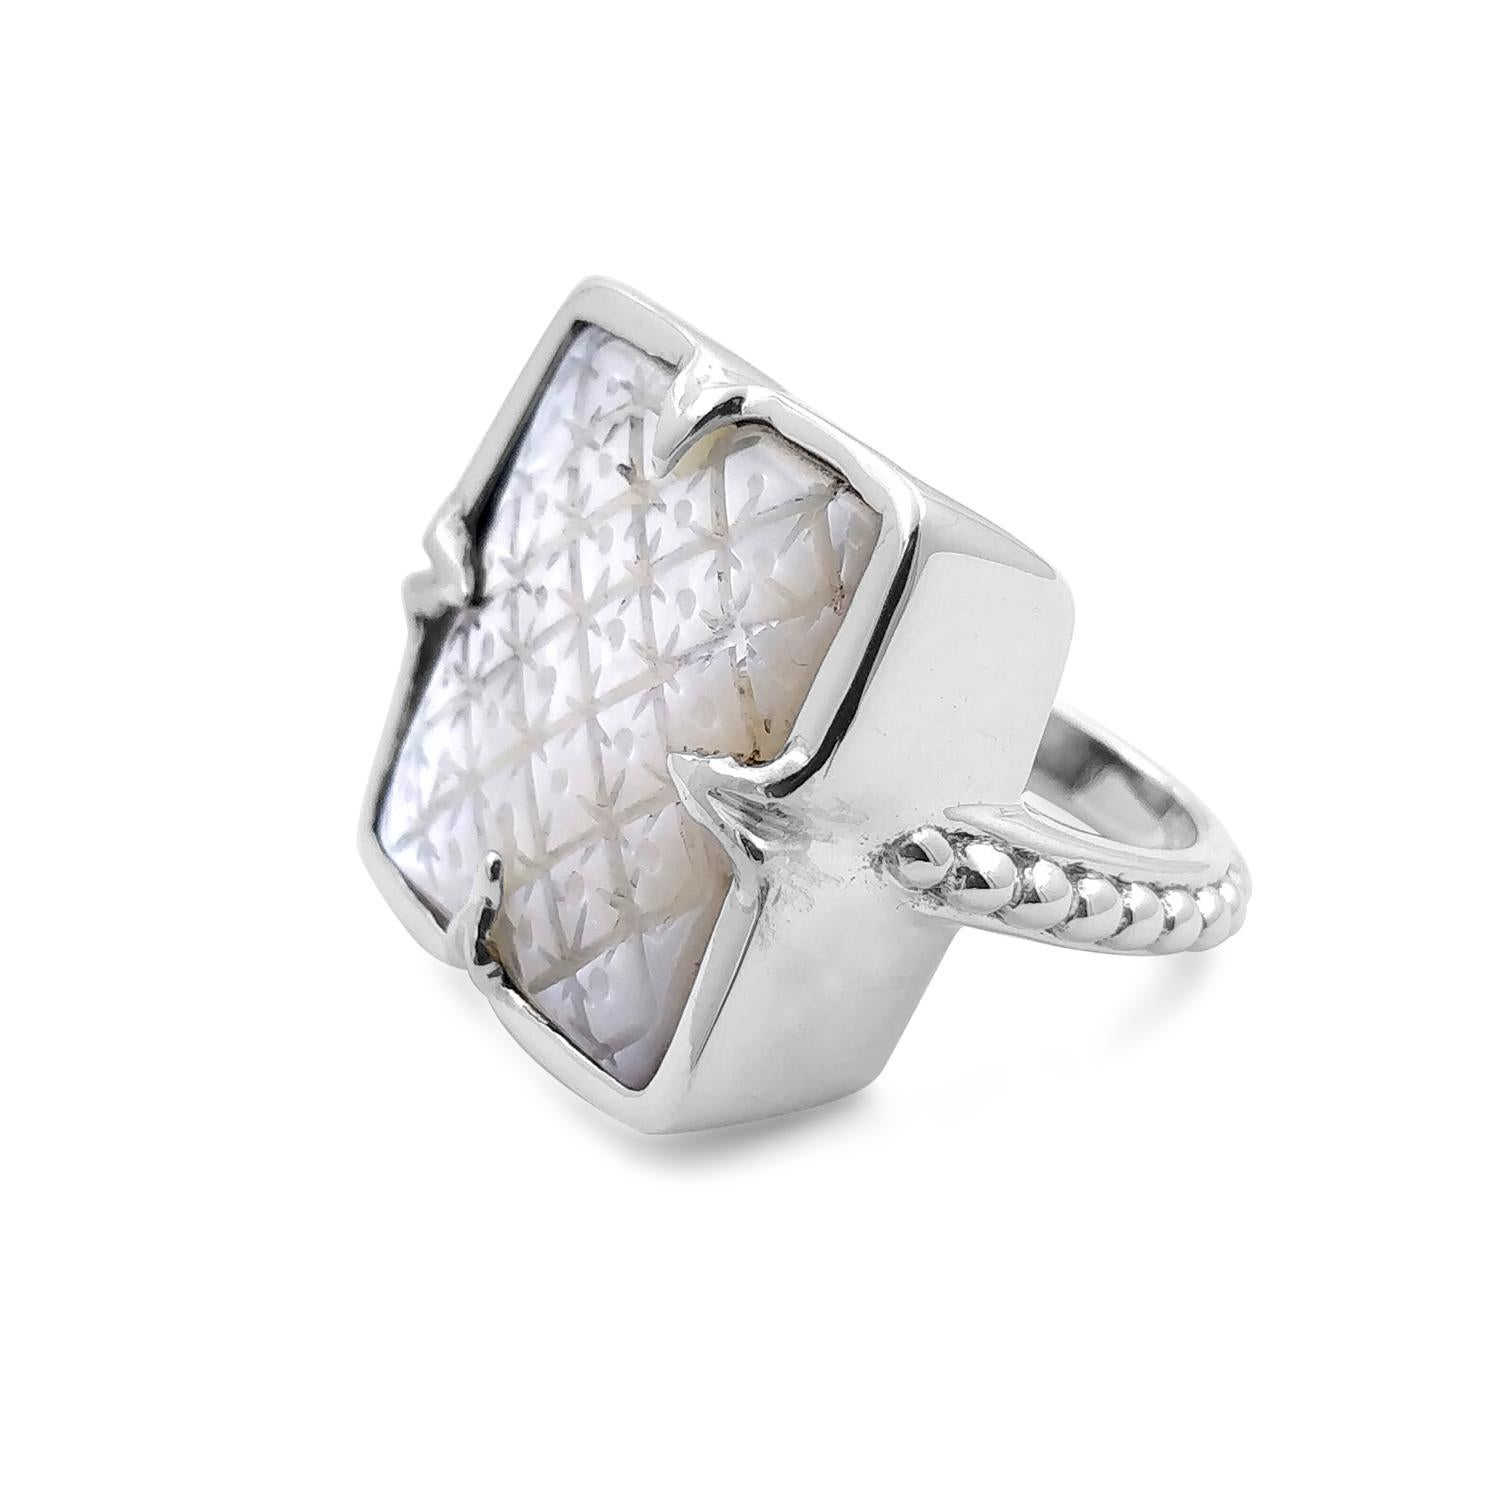 Indulge in the timeless elegance of Steven's jewelry with the Shimmering Sterling Silver Stephen Dweck Mother of Pearl Clover Ring. Crafted with meticulous attention to detail, this exquisite piece showcases the natural beauty of mother of pearl in